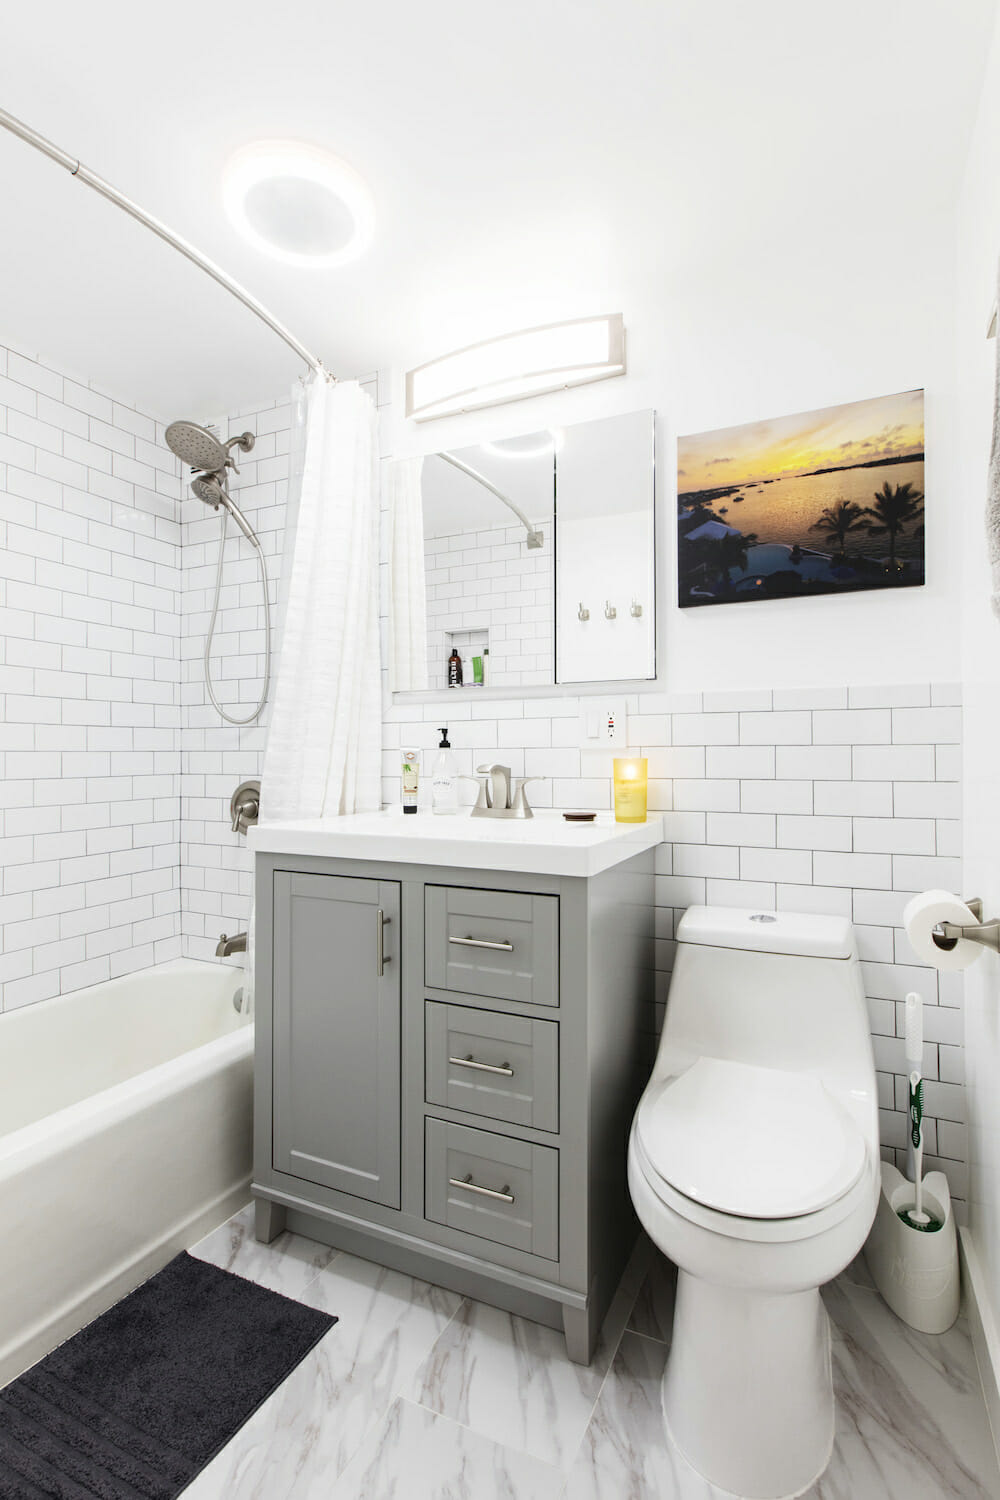 bathroom with white subway tiles on walls and bathtub and gray vanity with farmhouse sink and white marble tile flooring after renovation